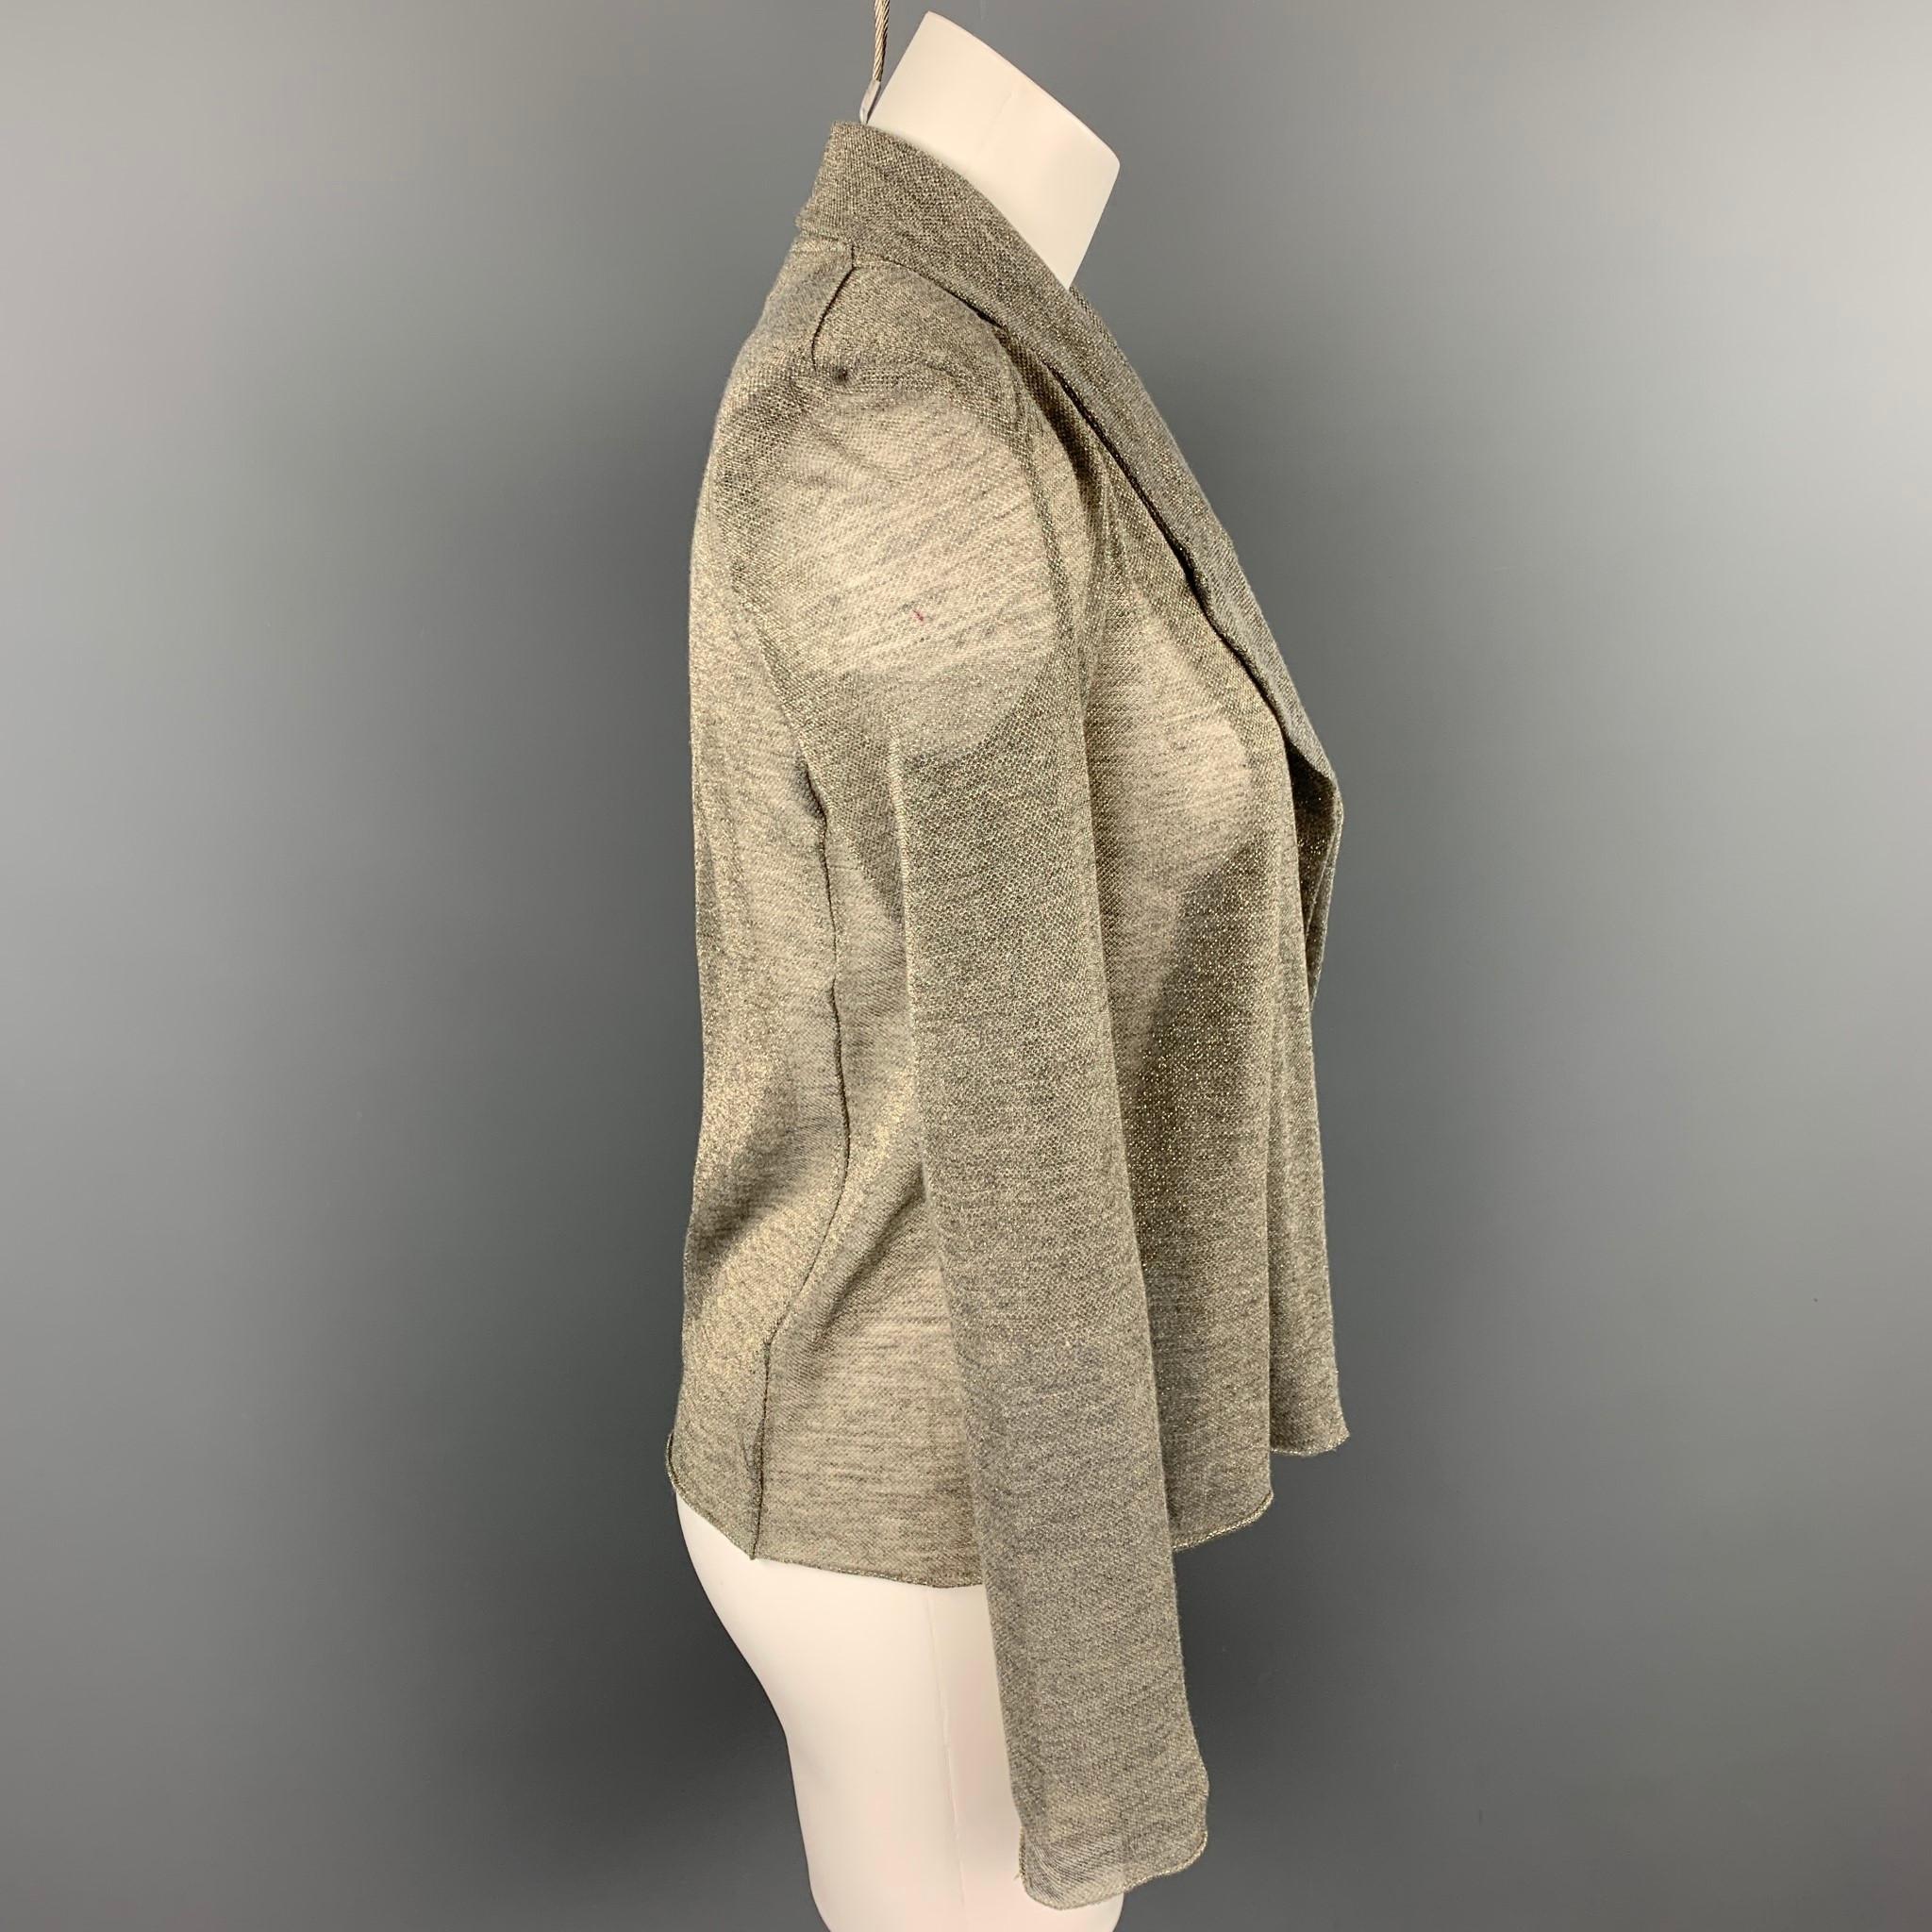 KOLOR jacket comes in a silver & grey metallic polyester featuring a peak lapel, shoulder pads, and a open front style. Made in Japan.

Very Good Pre-Owned Condition.
Marked: JP 1

Measurements:

Shoulder: 15 in.
Bust: 37 in.
Sleeve: 26 in.
Length: